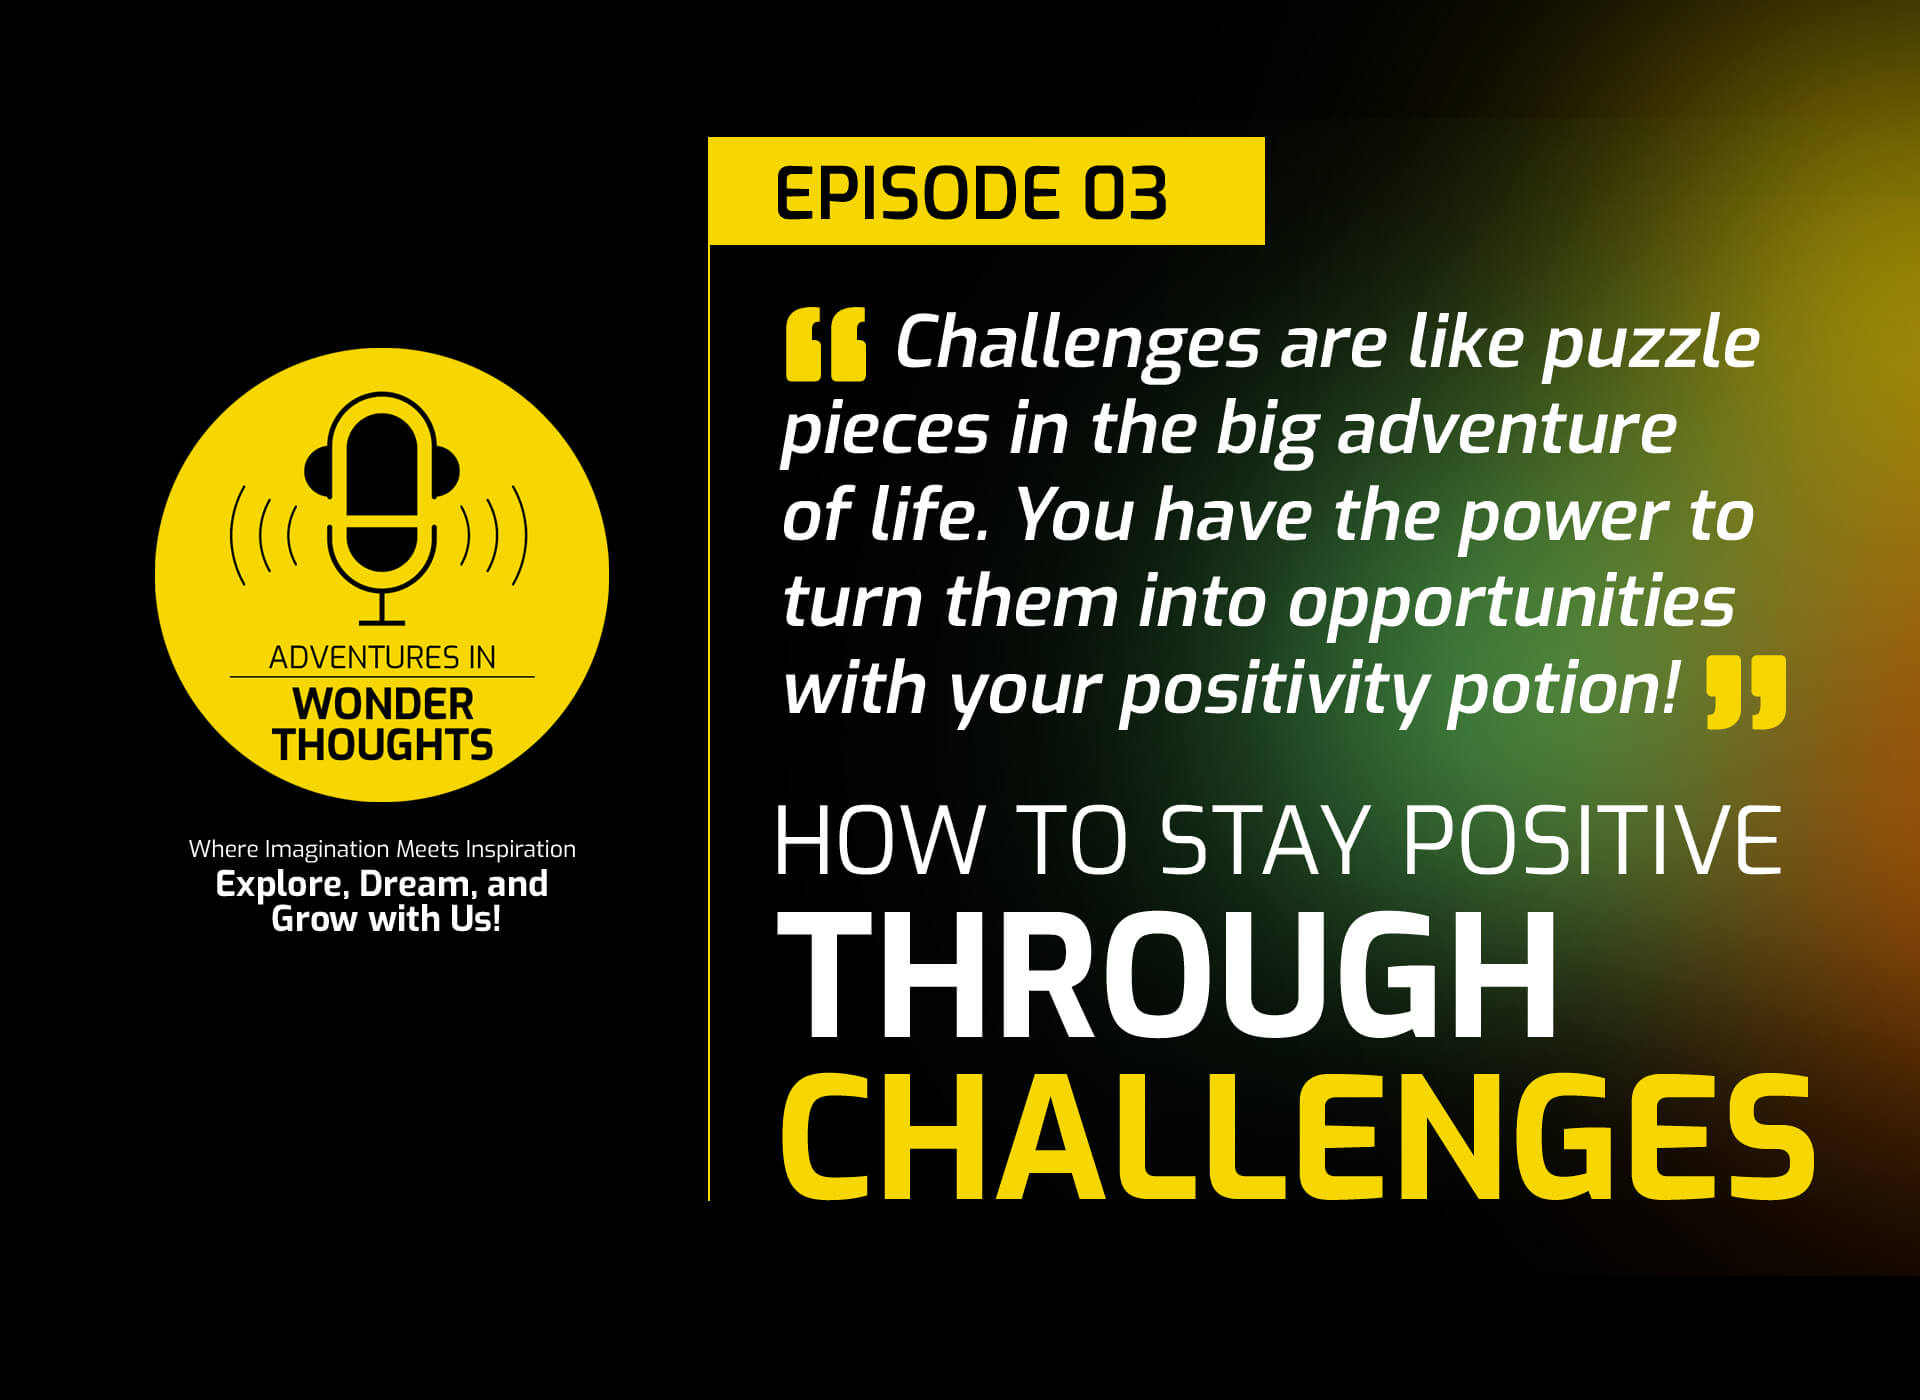 Episode 03: How to Stay Positive Through Challenges